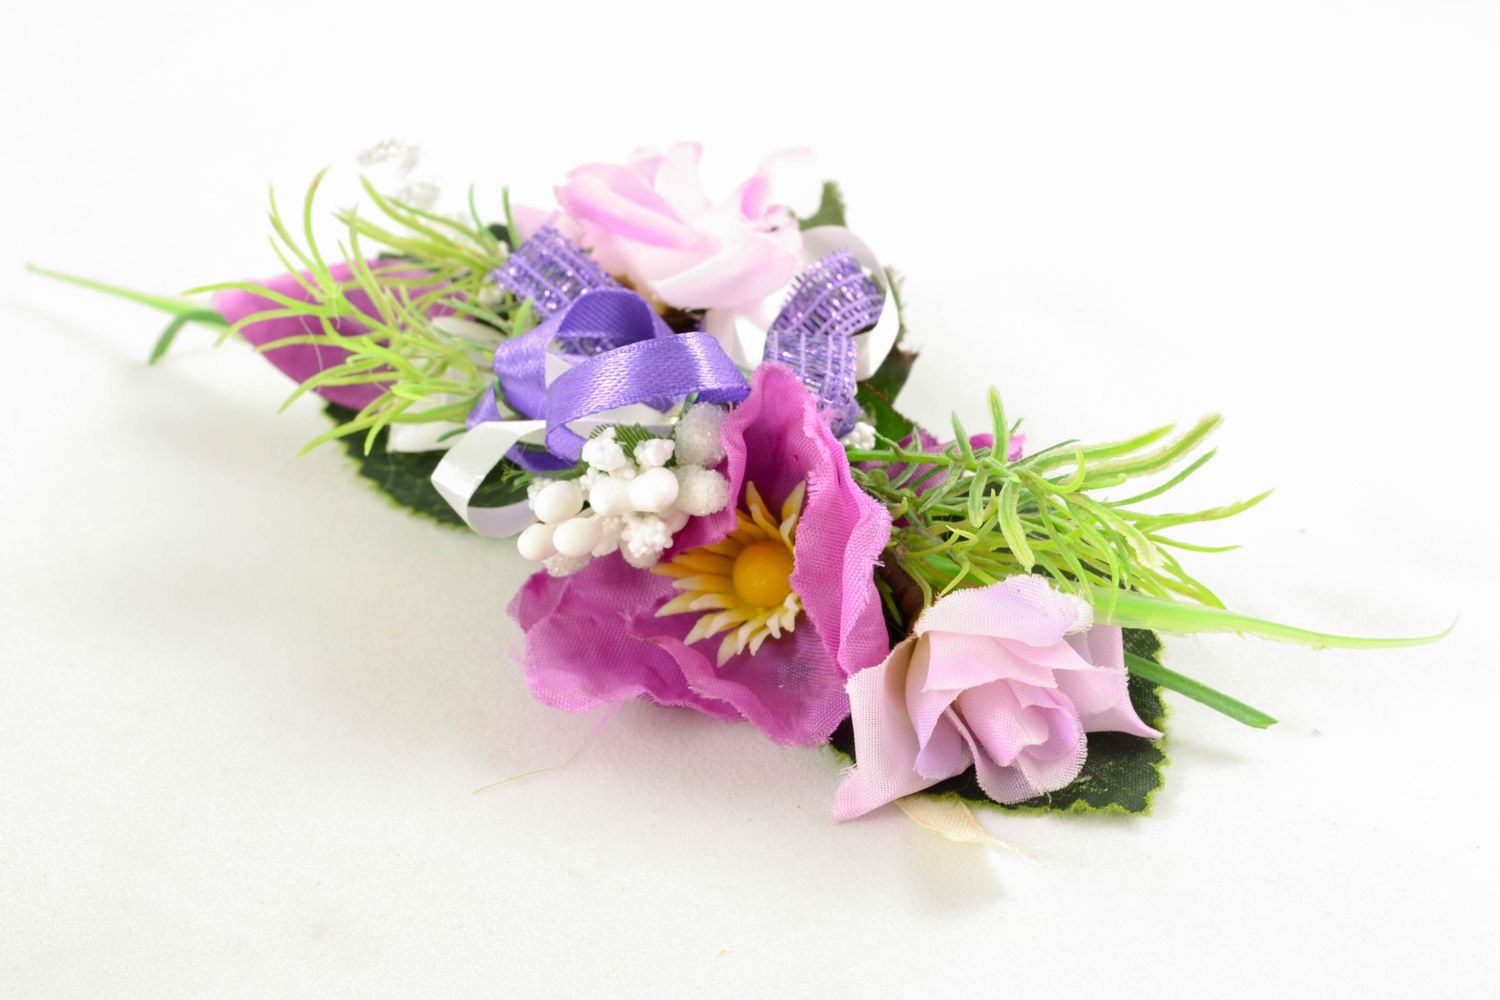 Boutonniere for an Easter basket
Wrist boutonniere photo 4